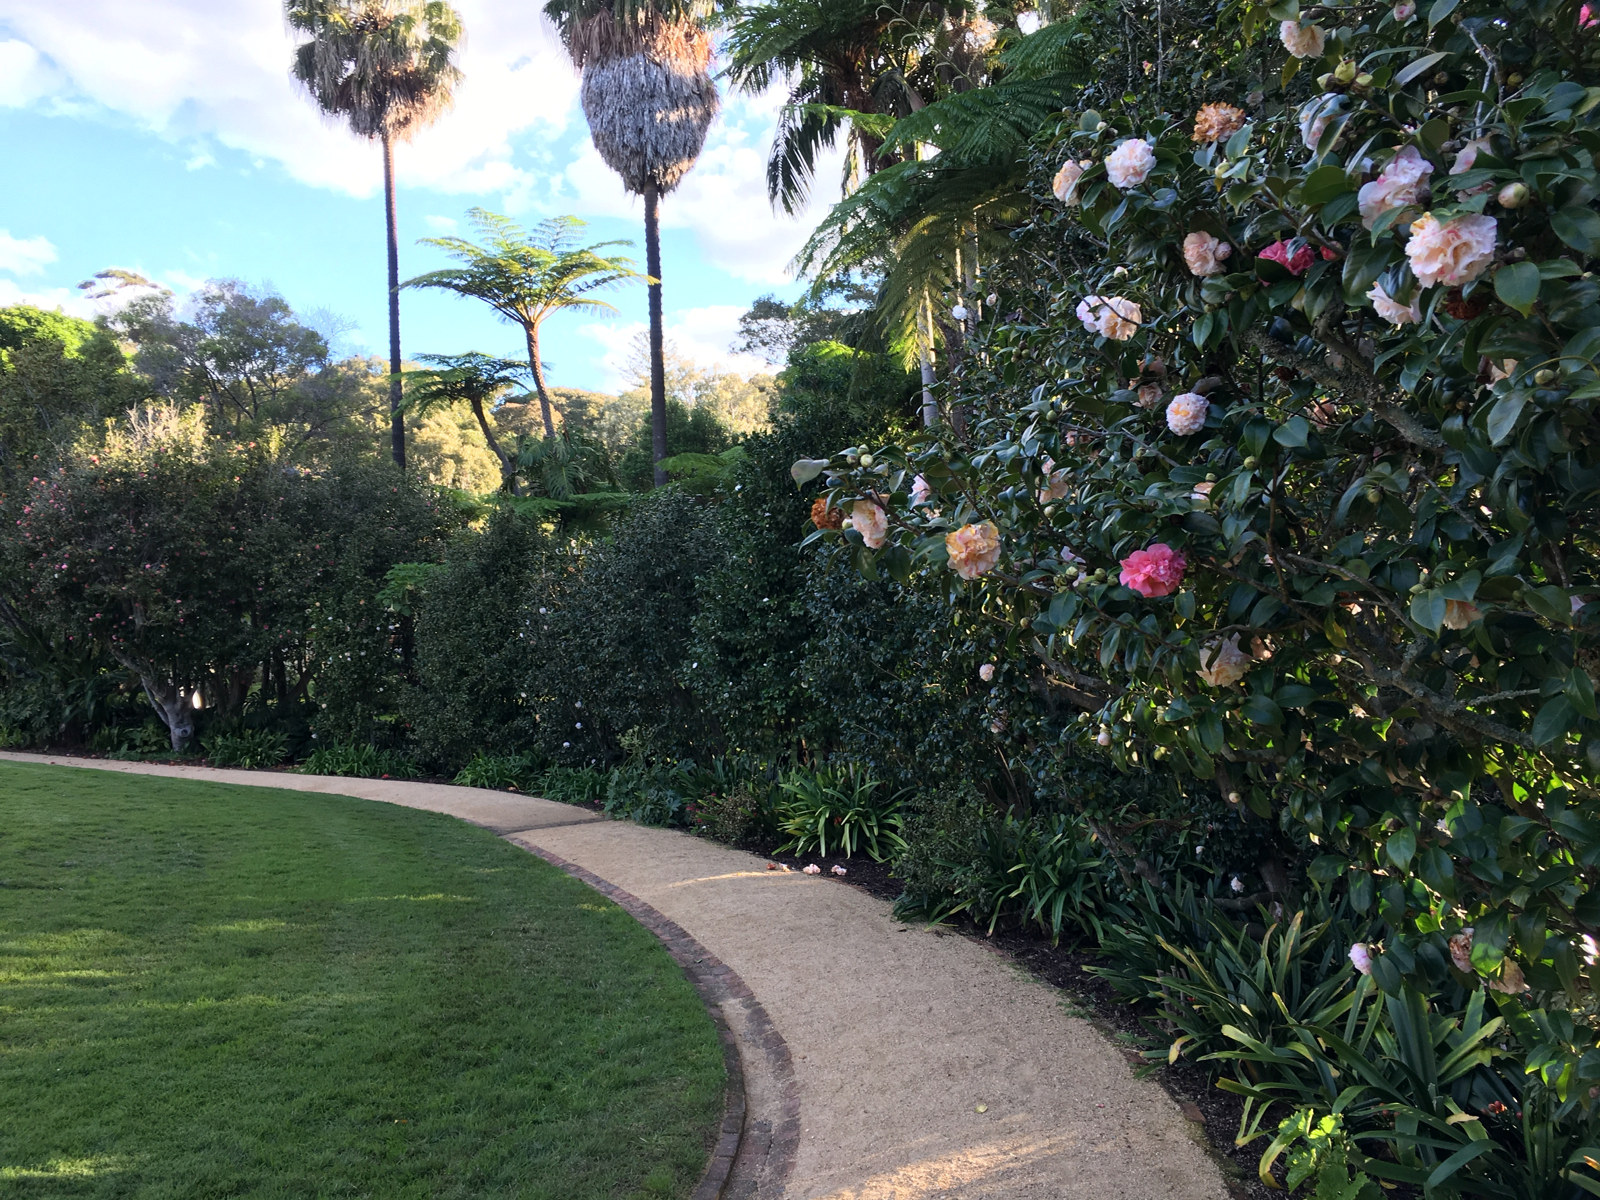 Photo of the gravel path in the Vaucluse House pleasure garden which is lined by camellia cultivars